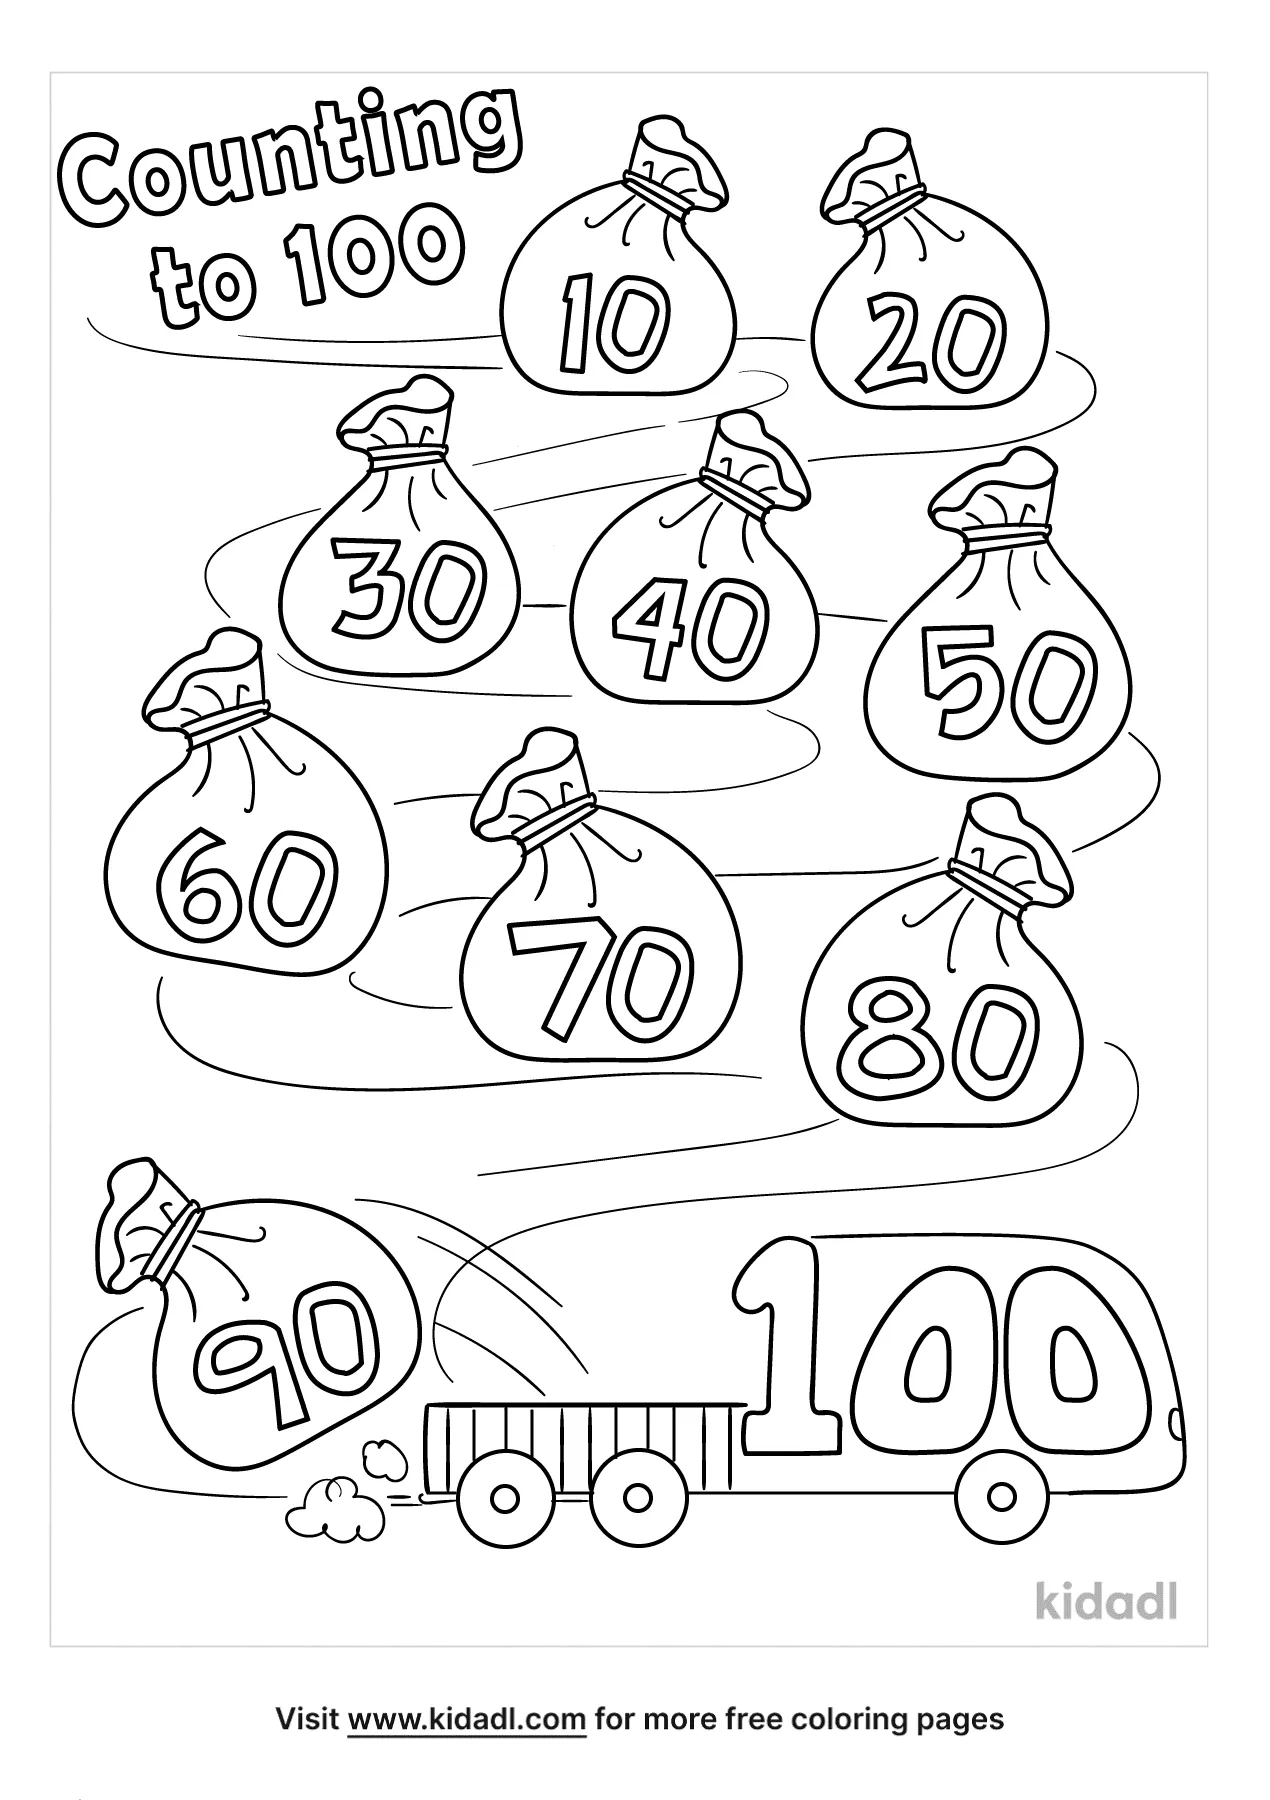 Counting To 100 Coloring Page